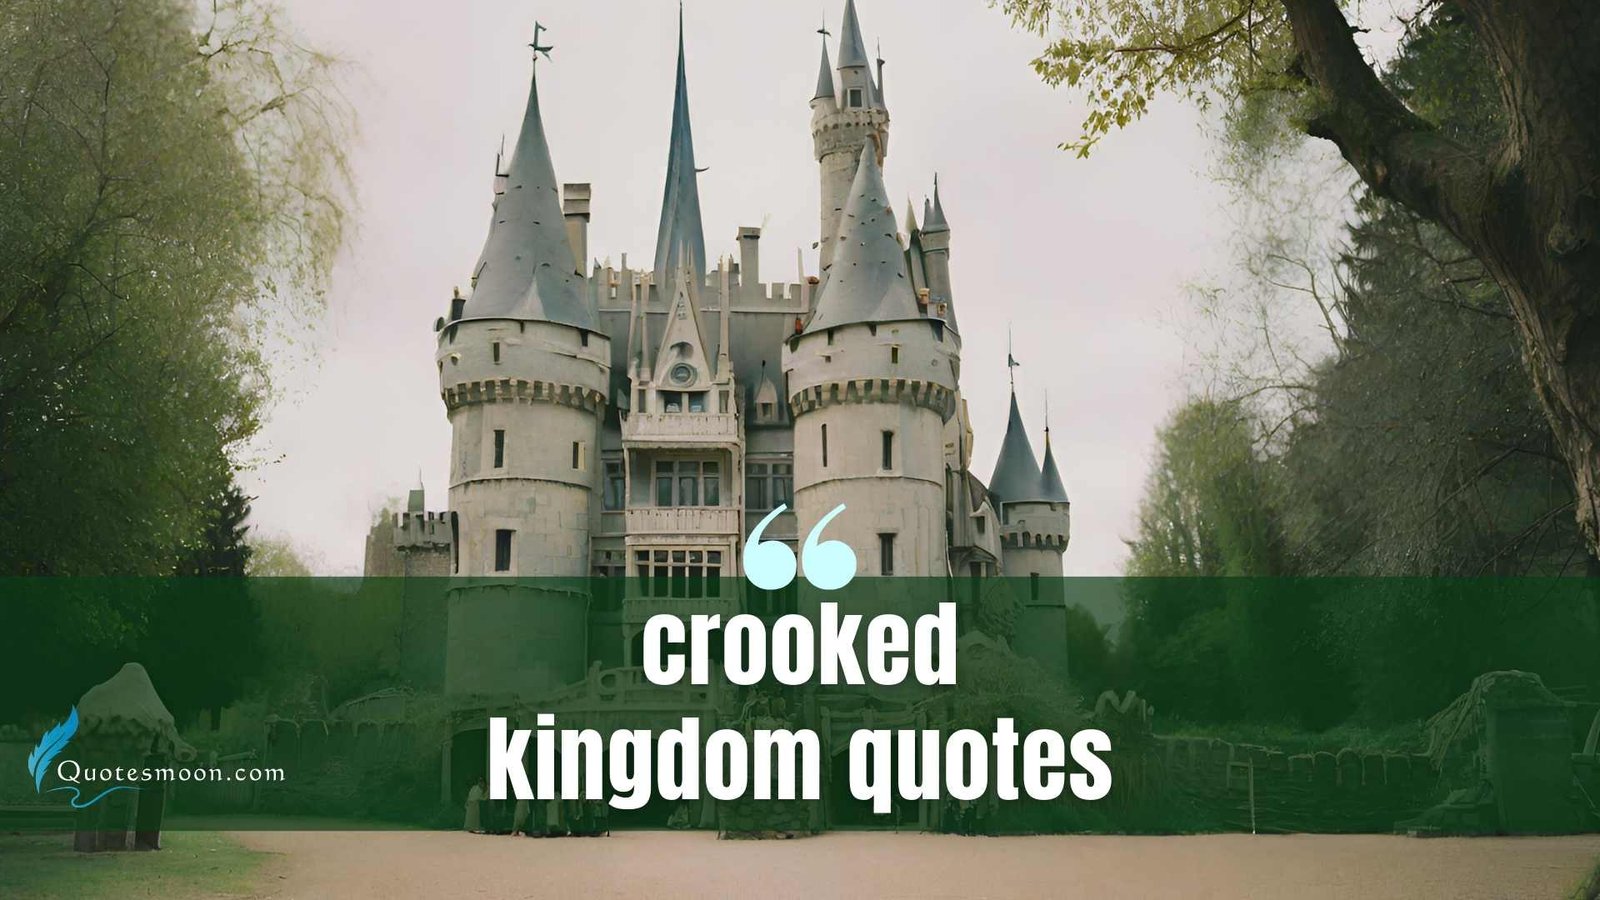 Crooked Kingdom Quotes images